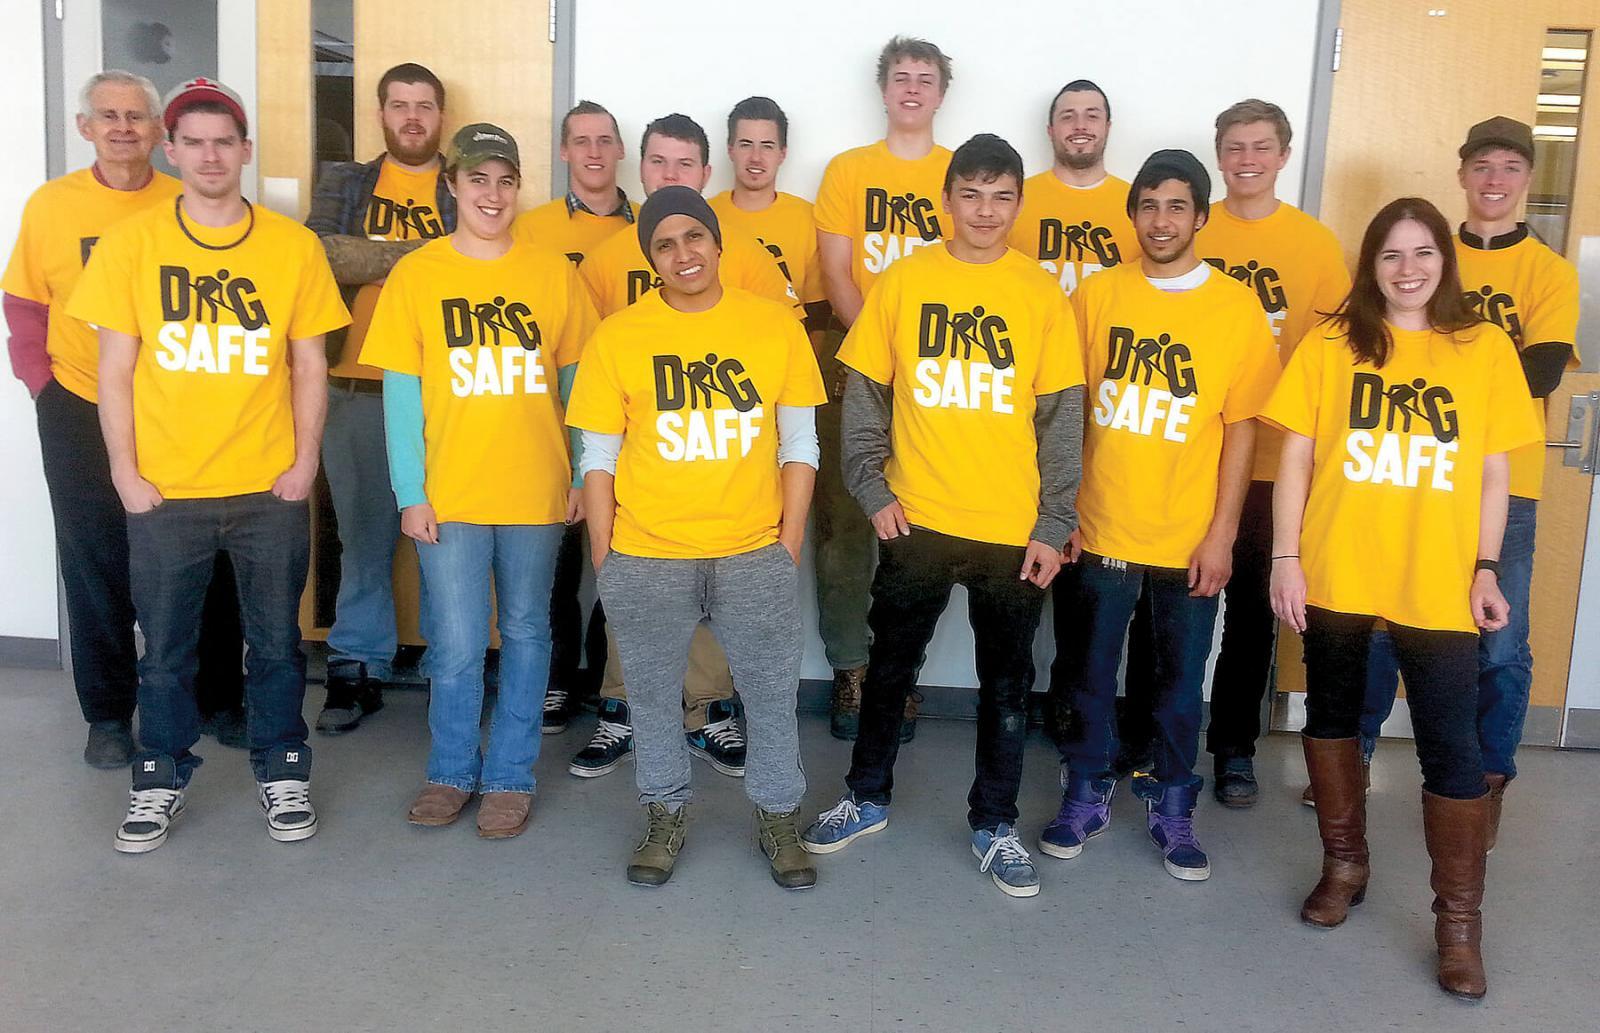 Students from Mohawk College celebrate Dig Safe Day.